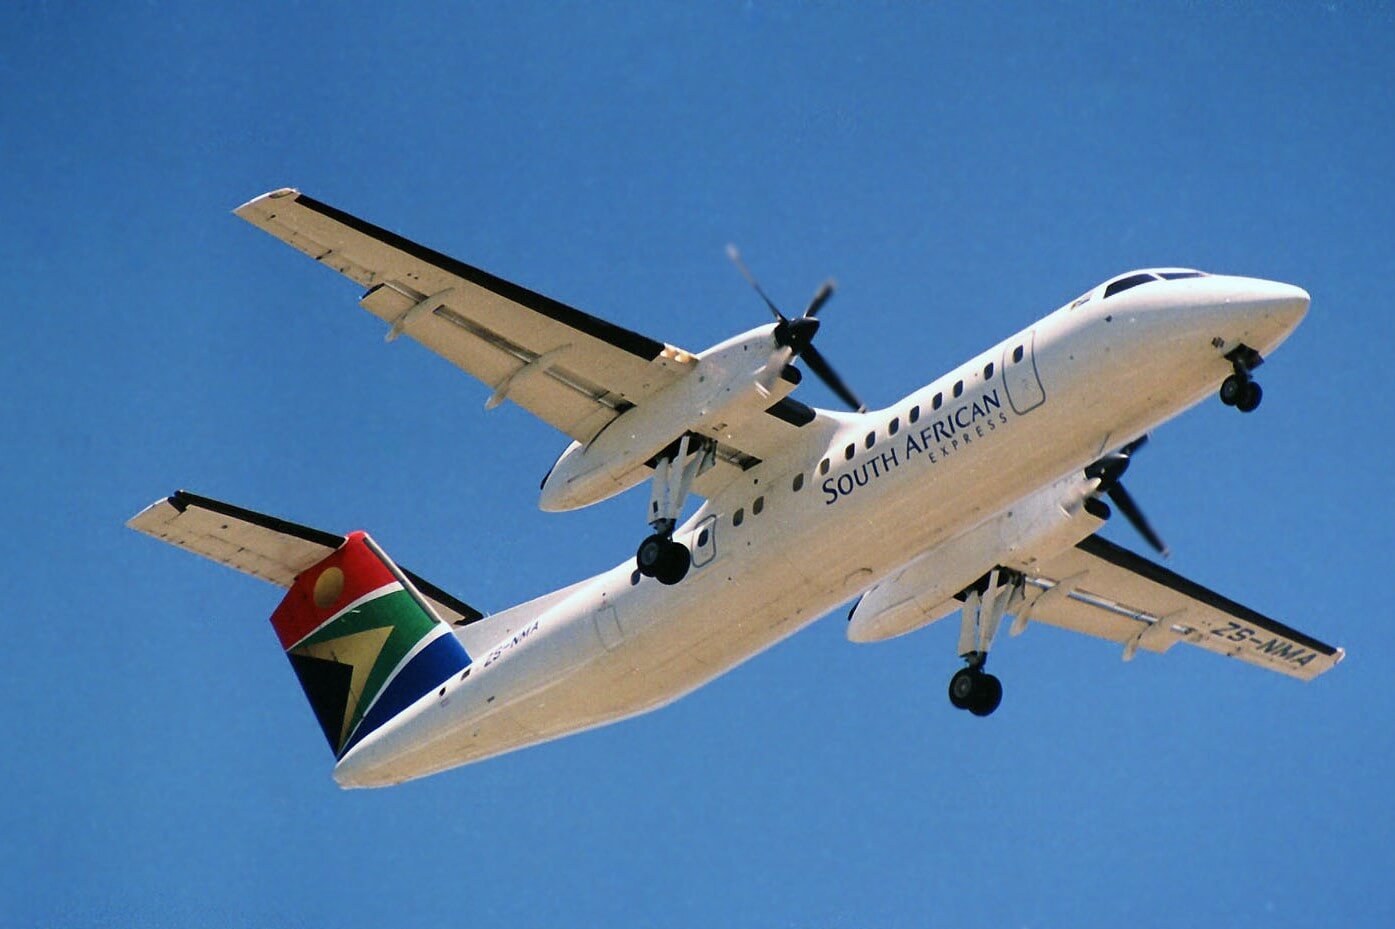 South African Express staff attempts to buy the dying airline - AeroTime